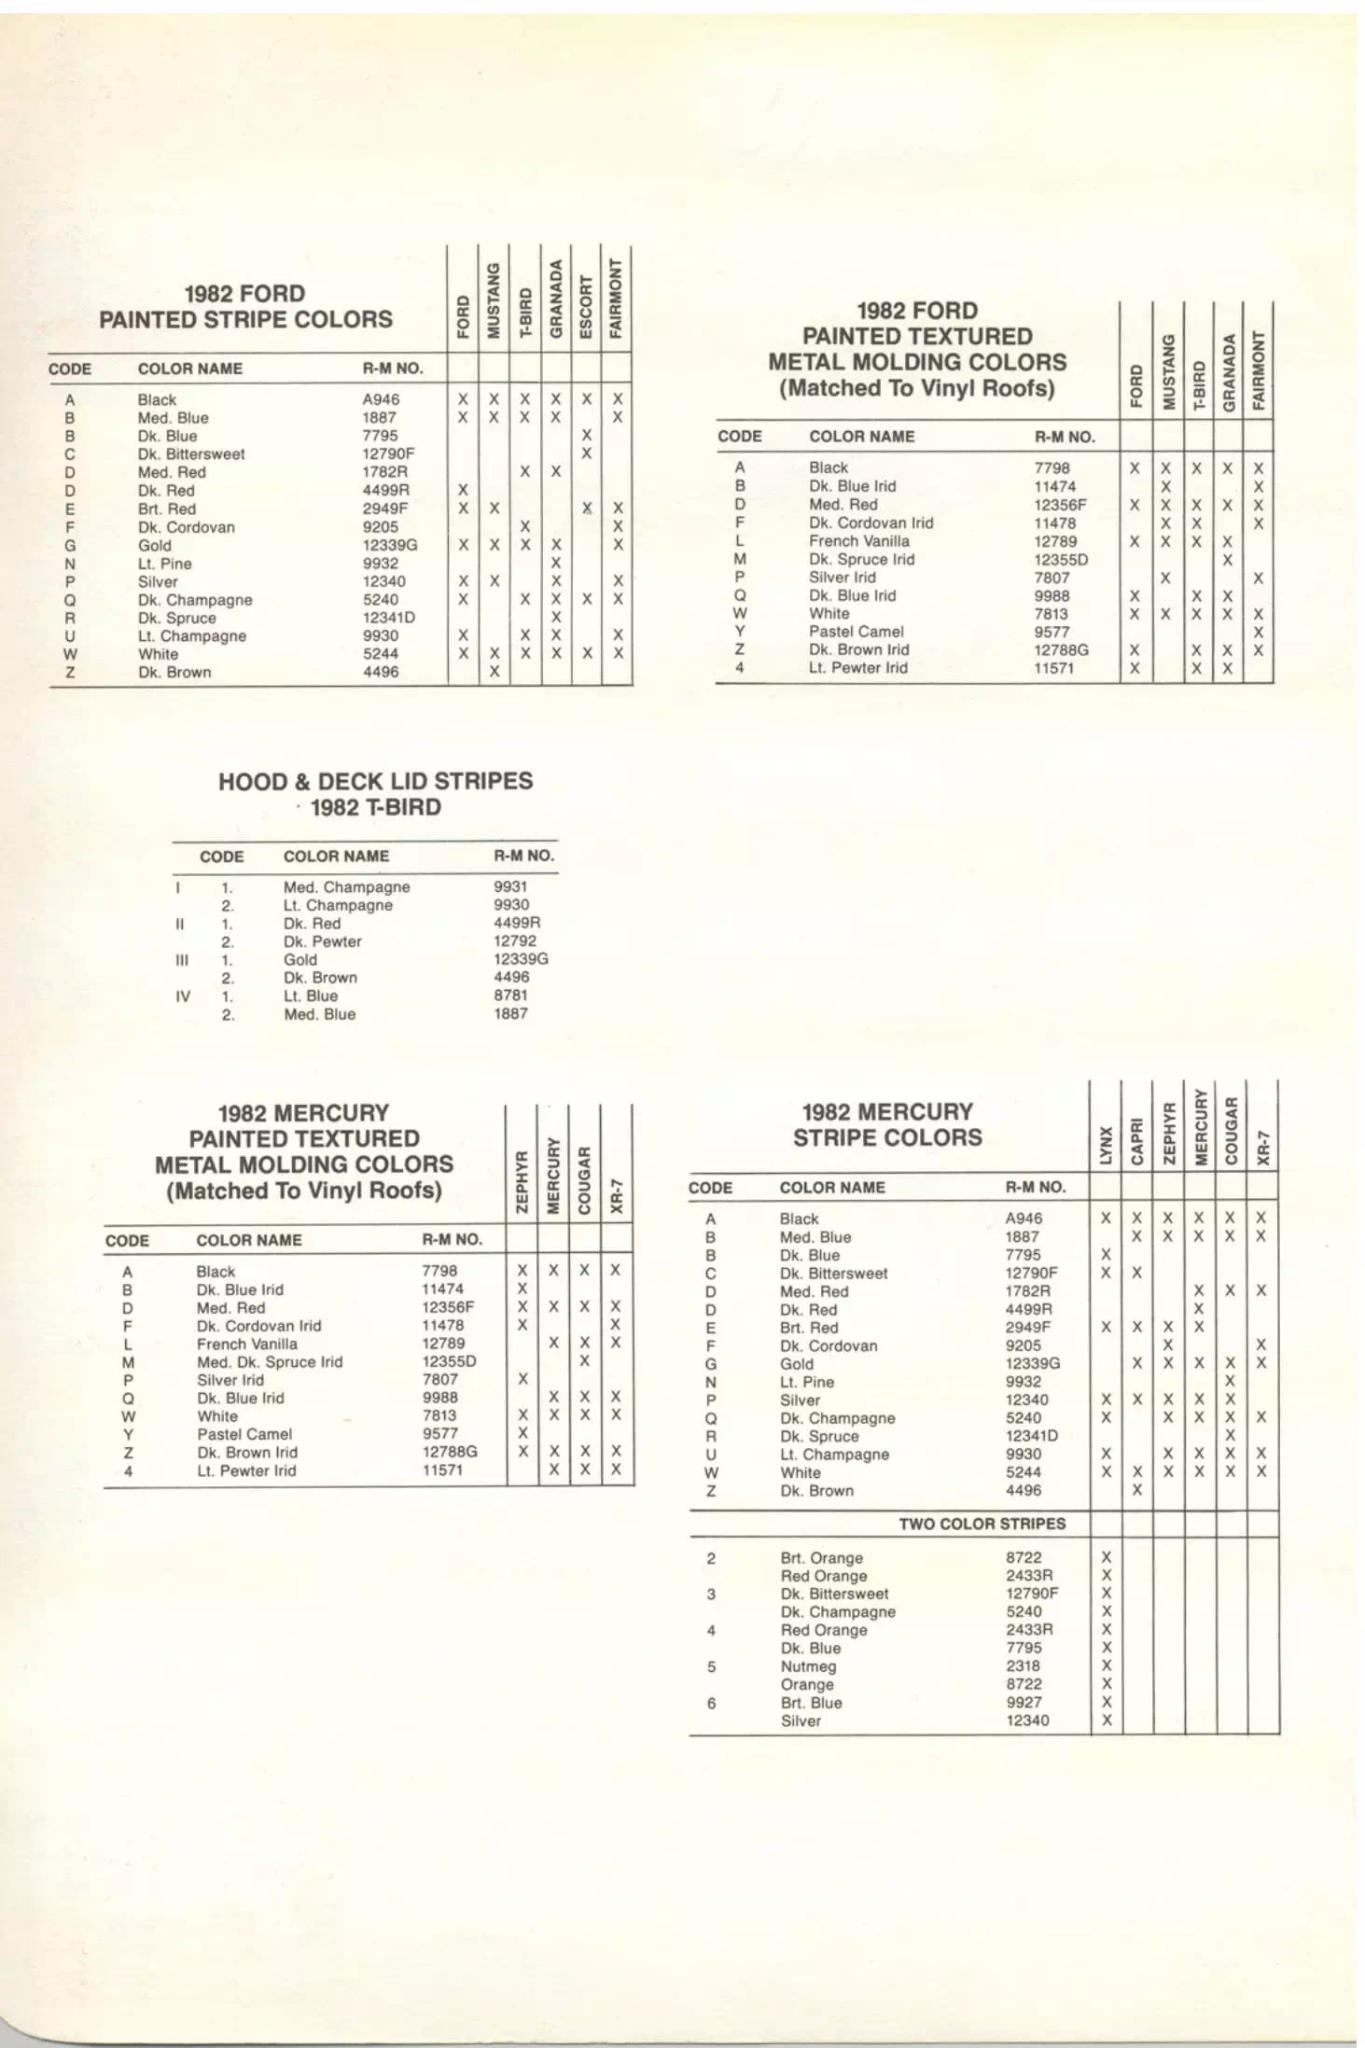 Colors and Codes used on Fords in 1982